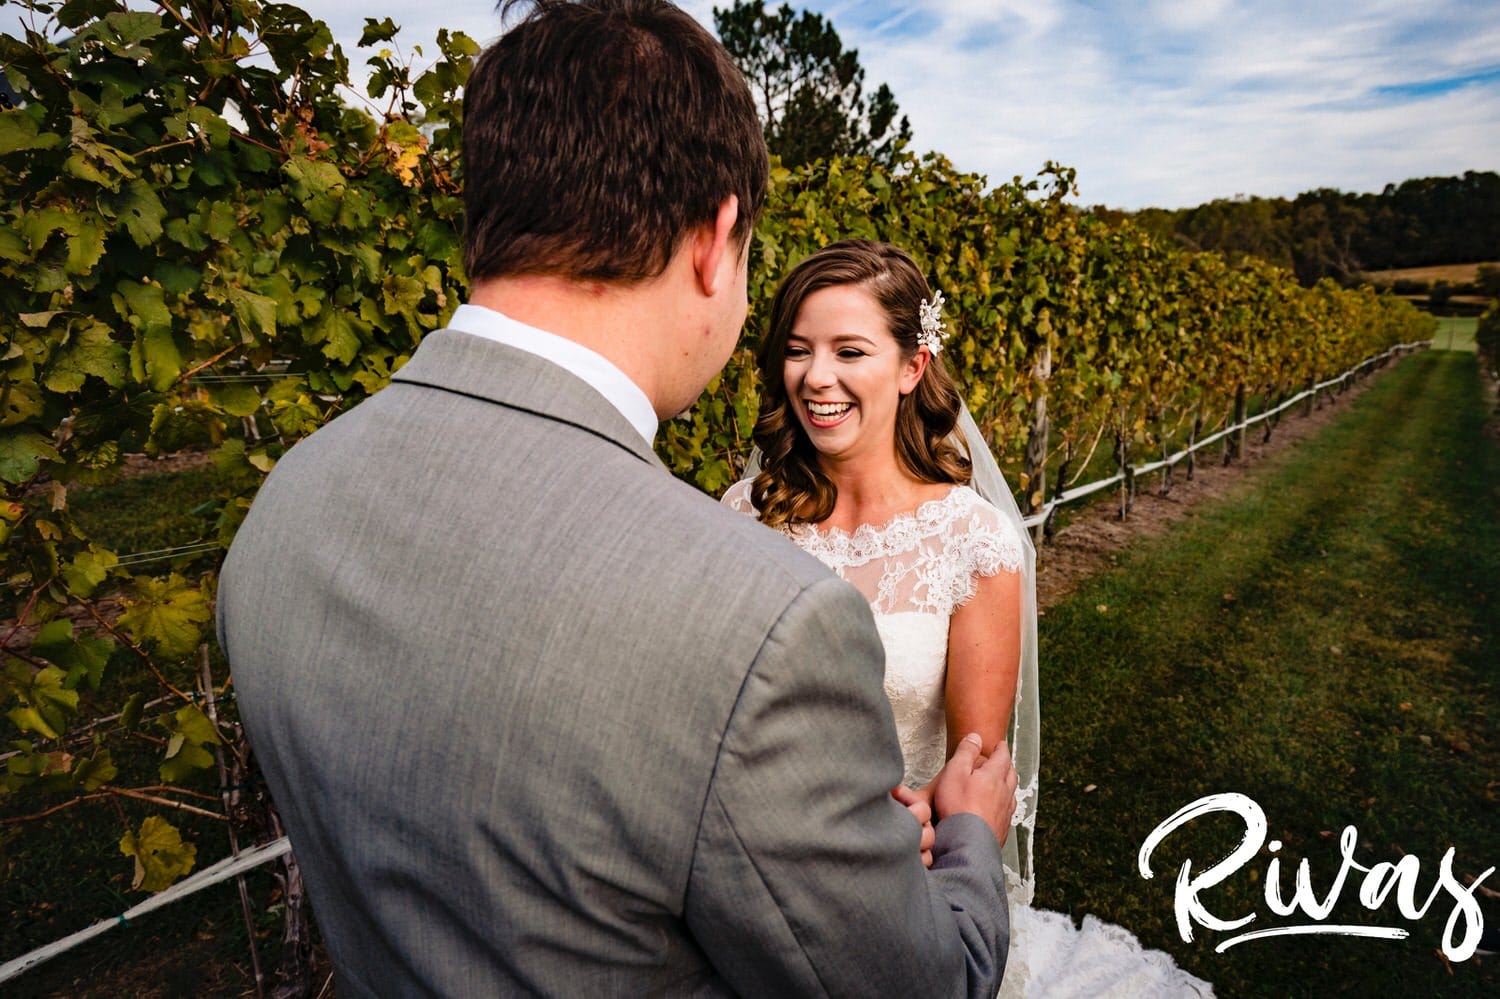 A colorful, candid picture of a bride embracing her groom during their first look on their fall wedding day at The Barns at Hamilton Station Vineyard. 